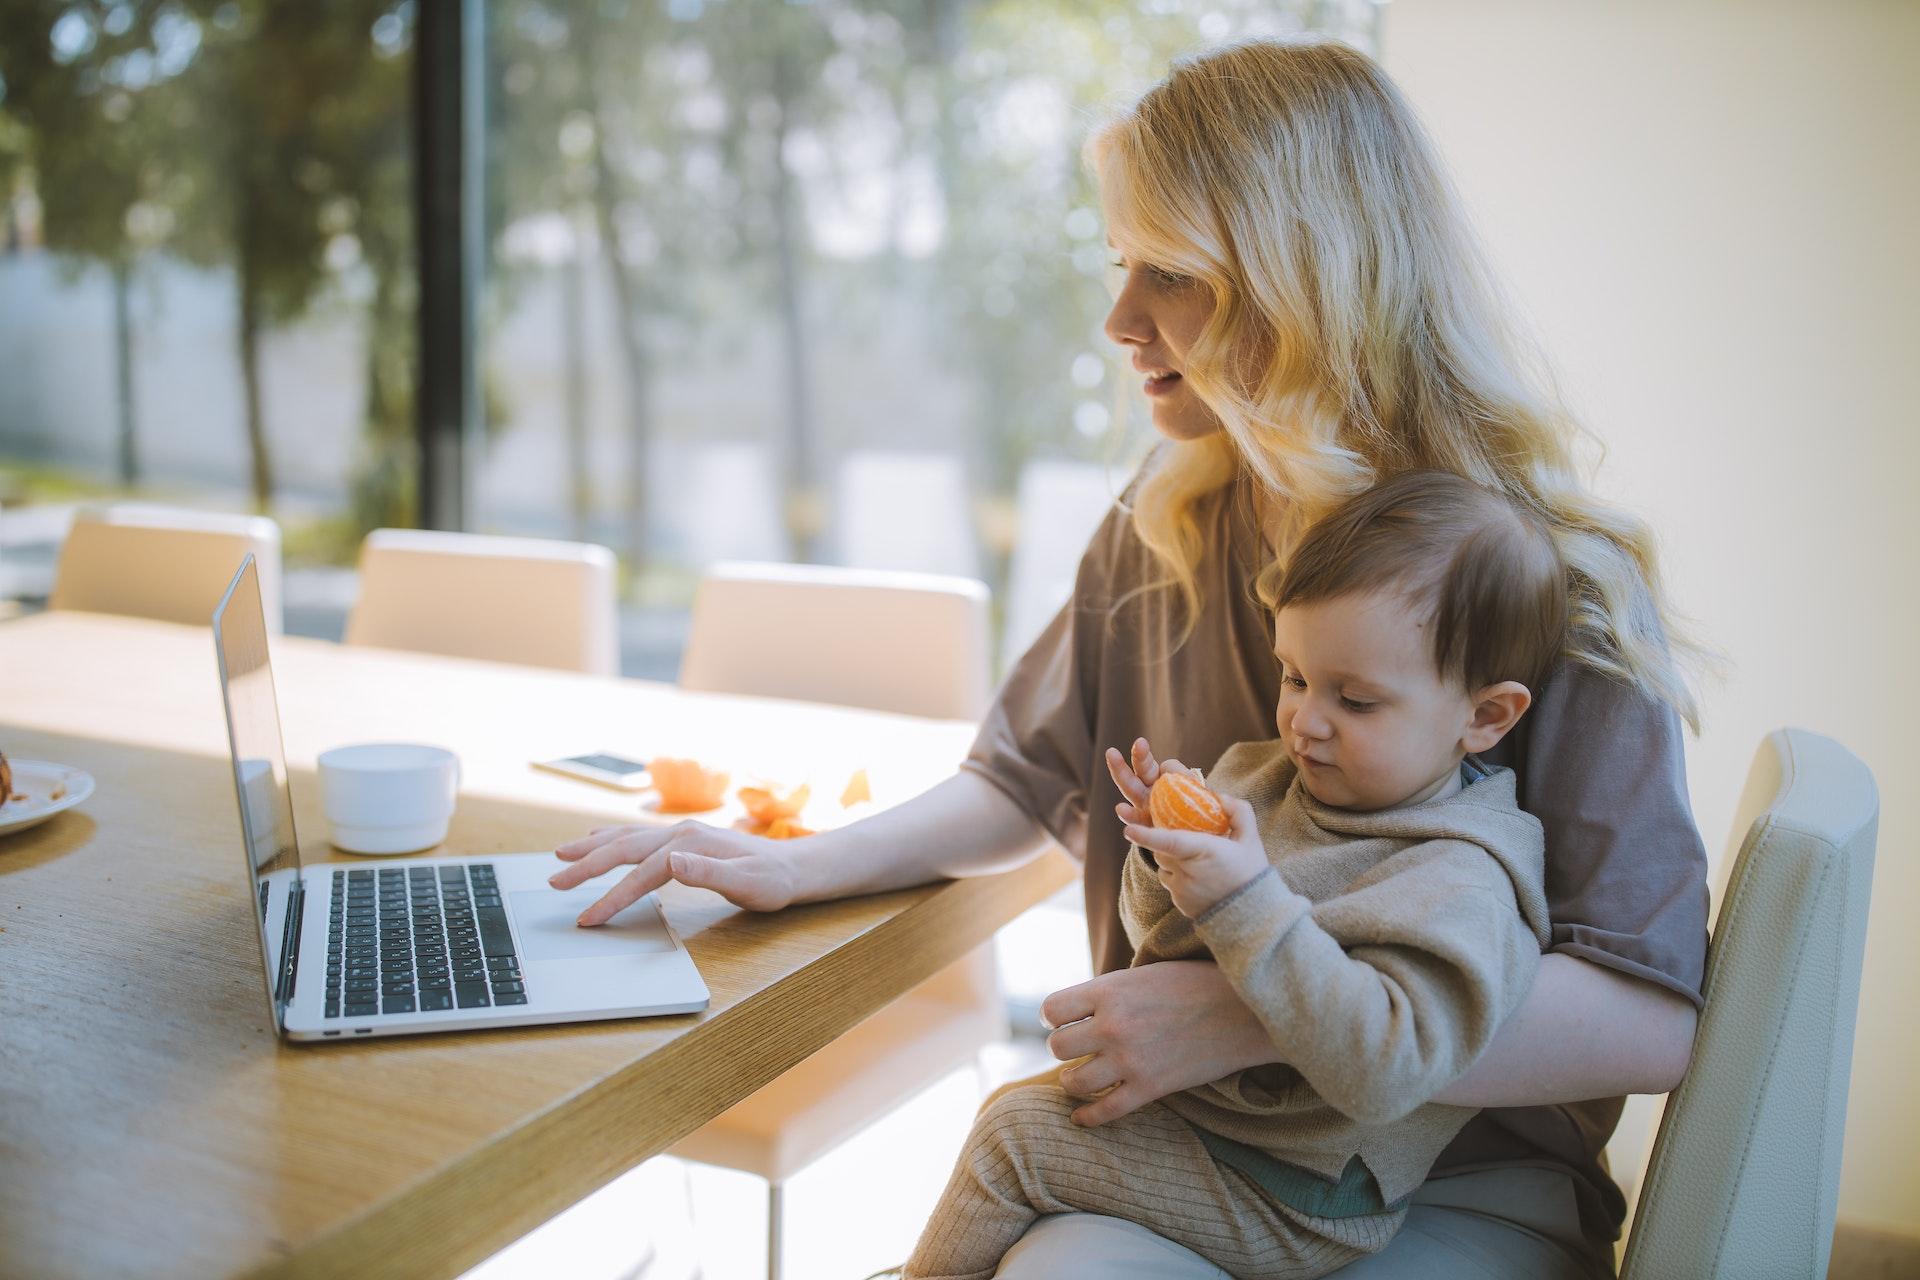 Starting a Small Business as a Stay-at-Home Parent